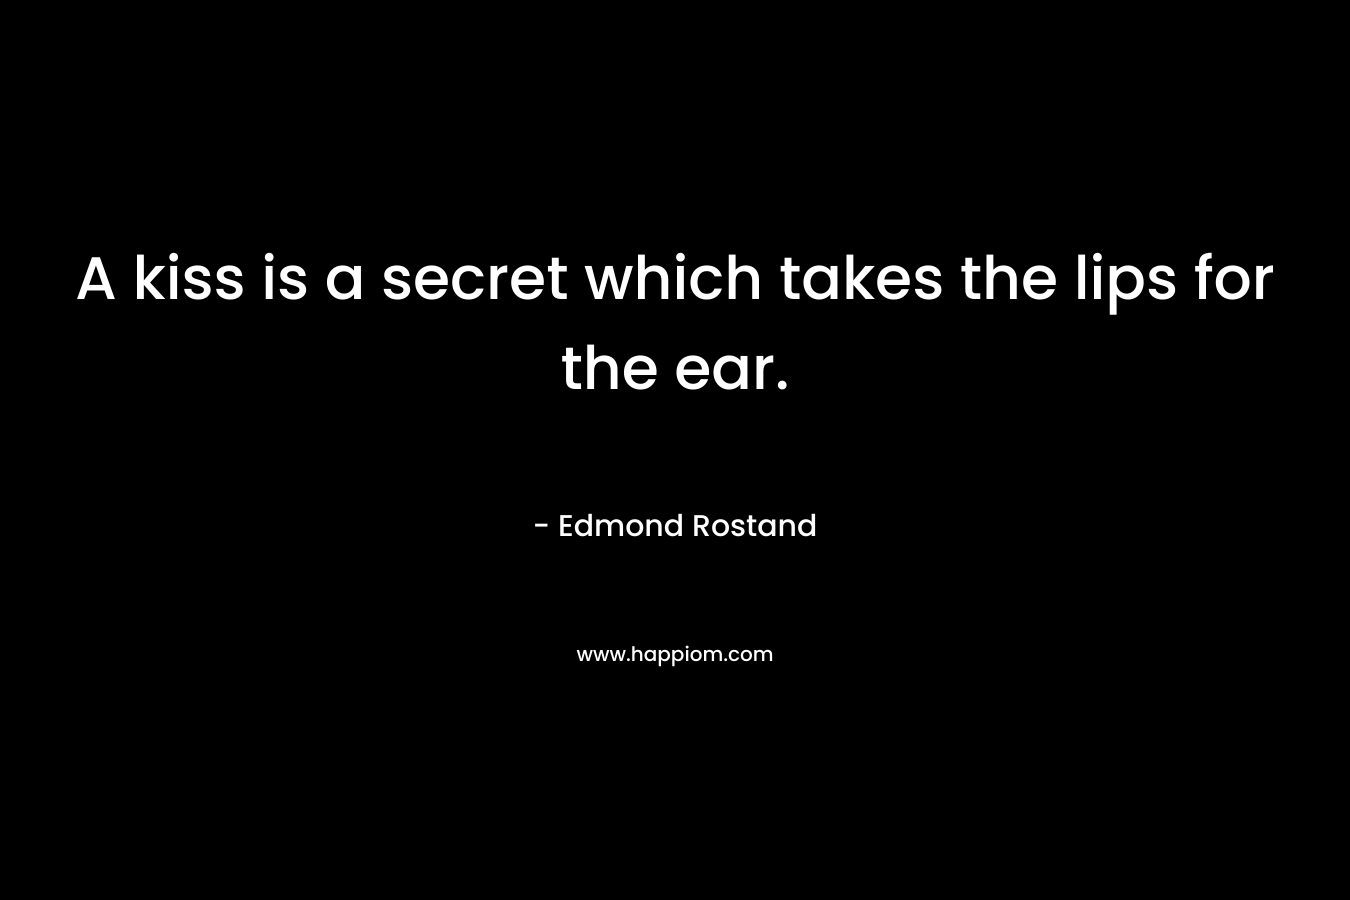 A kiss is a secret which takes the lips for the ear.